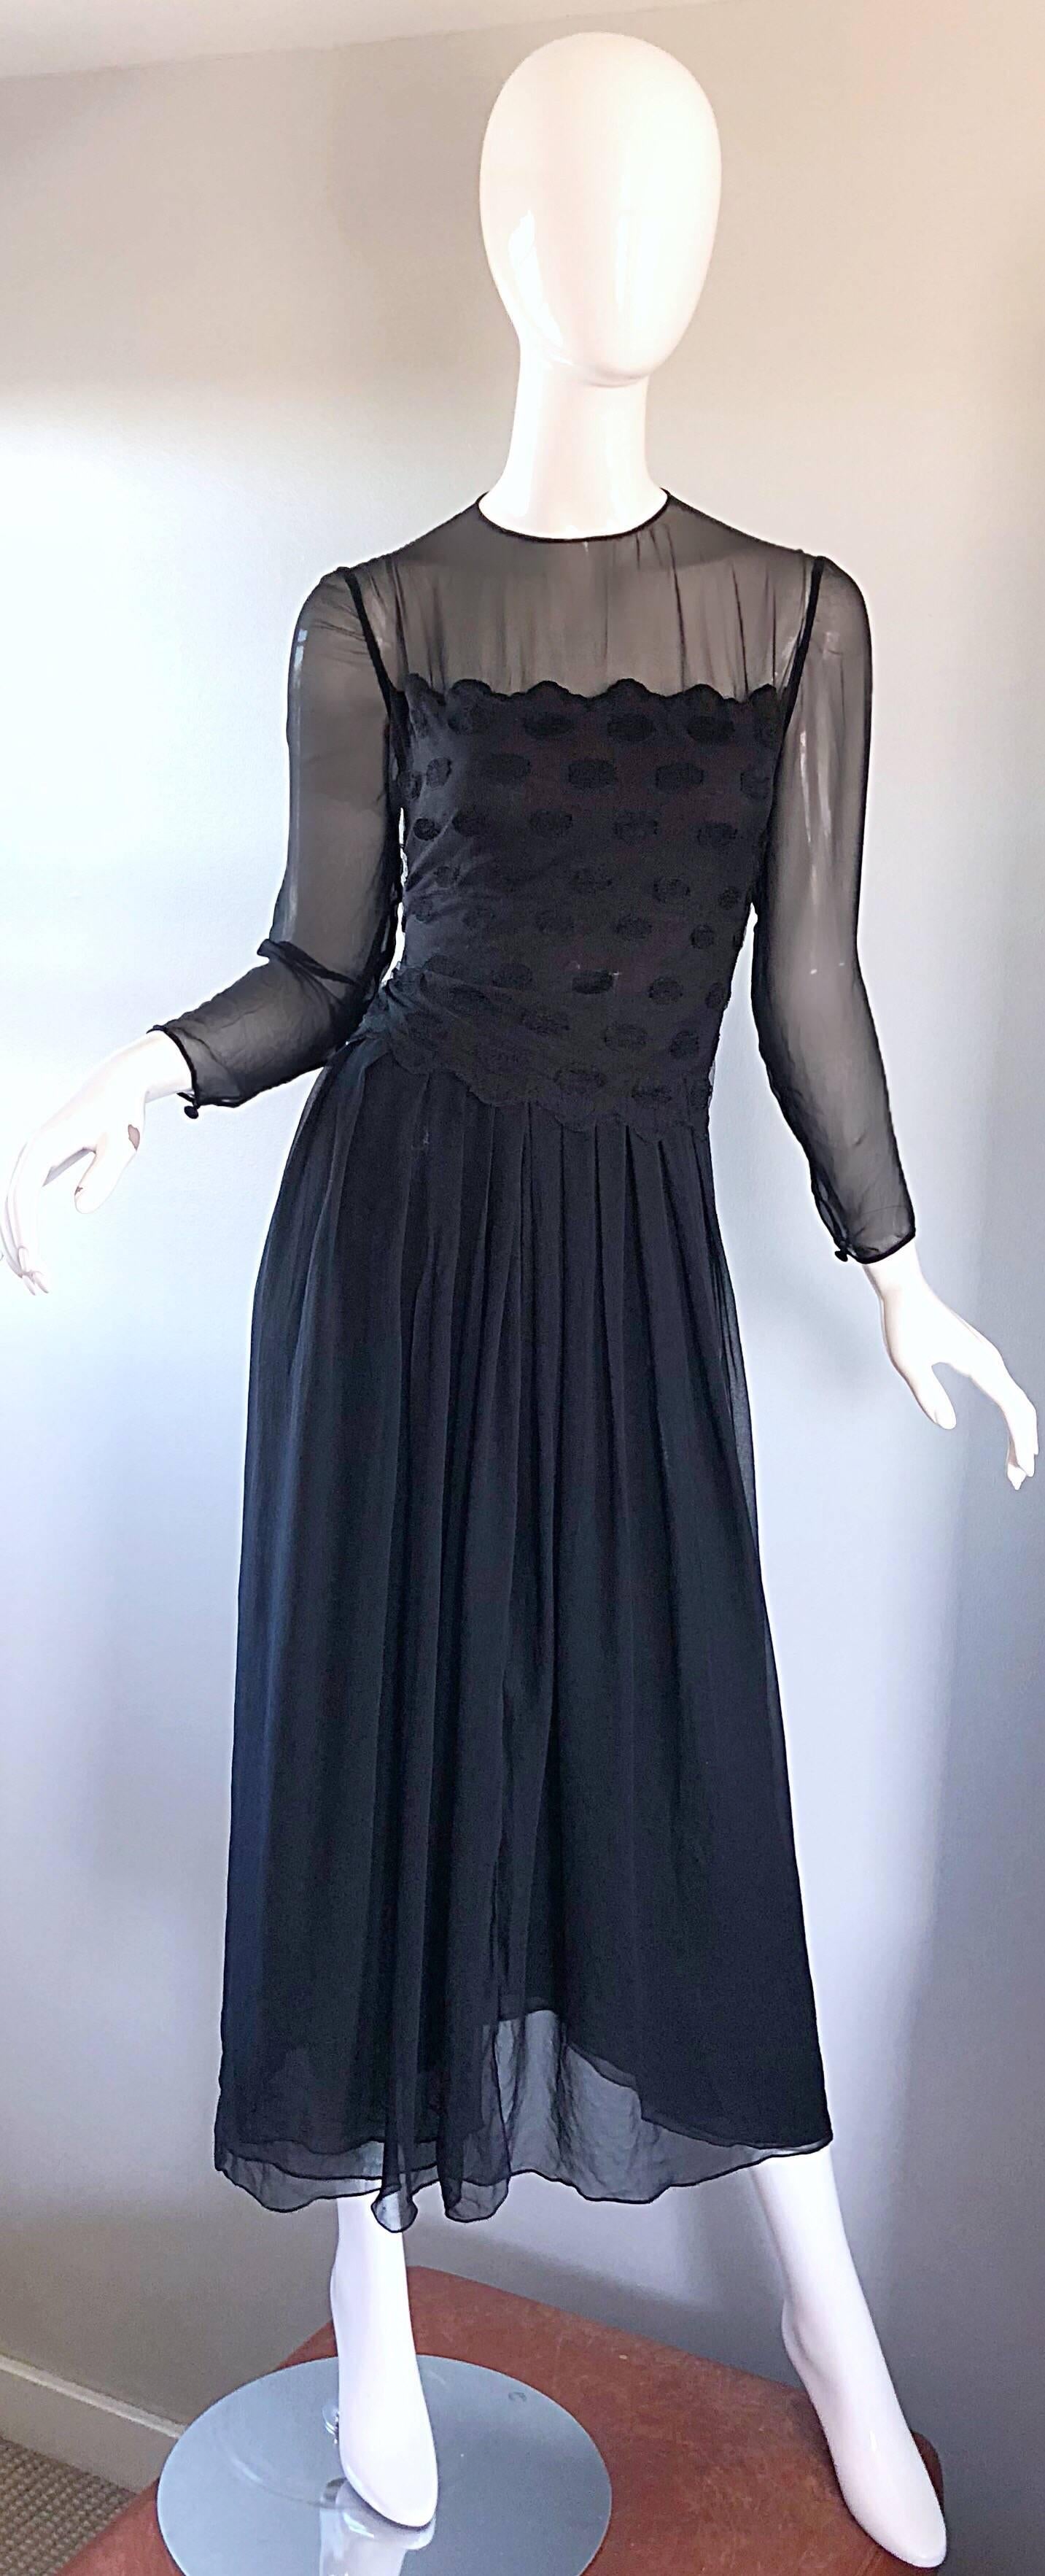 Beautiful 1990s BILL BLASS for BERGDORF GOODMAN couture quality black evening dress! Luxurious black silk chiffon. Black on black polka dot bodice, with semi sheer black chiffon above the front and back bodice, and on the long sleeves. Button